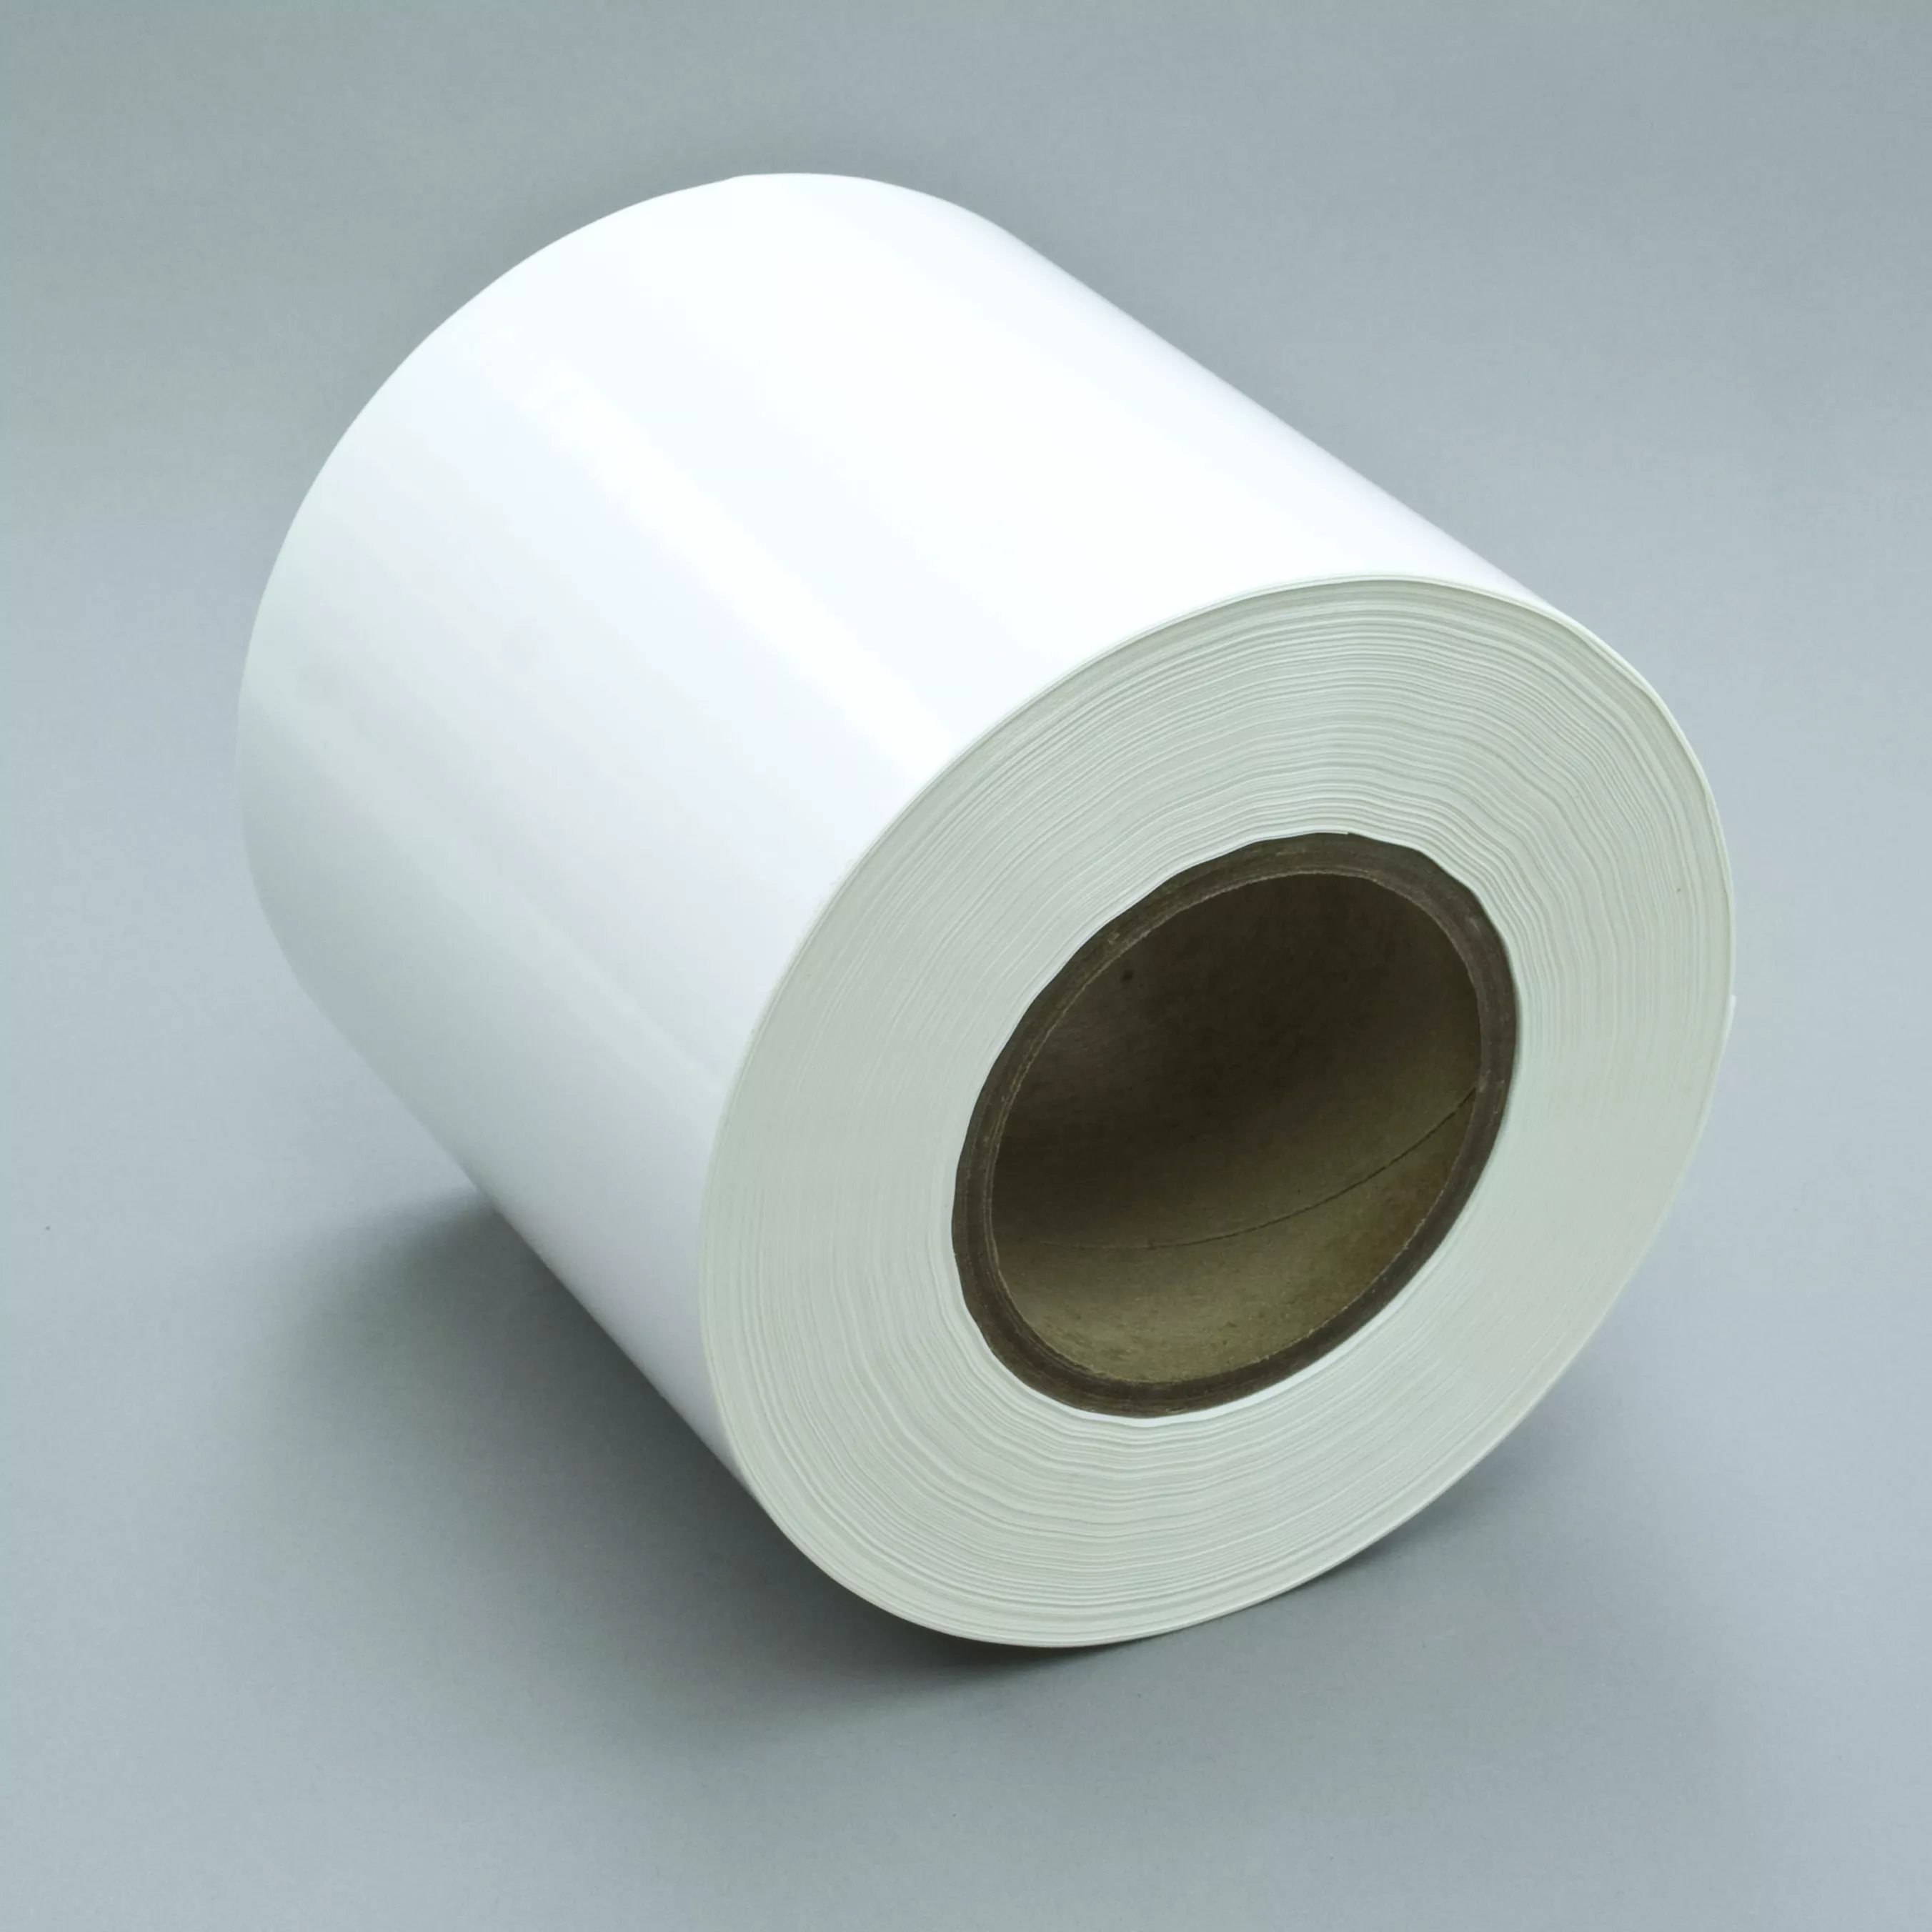 3M™ Press Printable Label Material 8418, White Polyester Gloss, 12 in x
333 yd, 1 Roll/Case